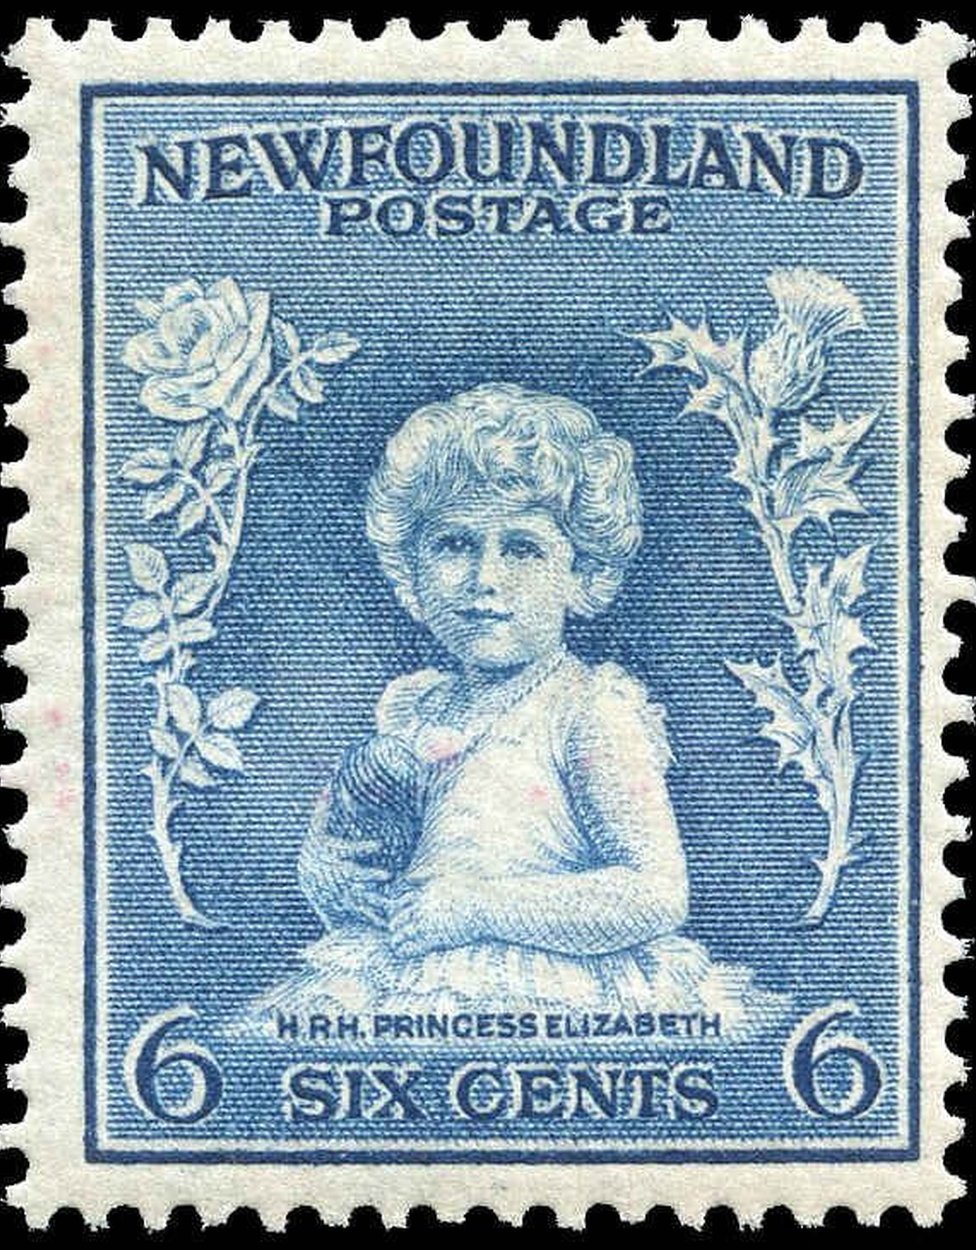 Princes Elizabeth featured on featured on a six cent stamp in Newfoundland in 1932